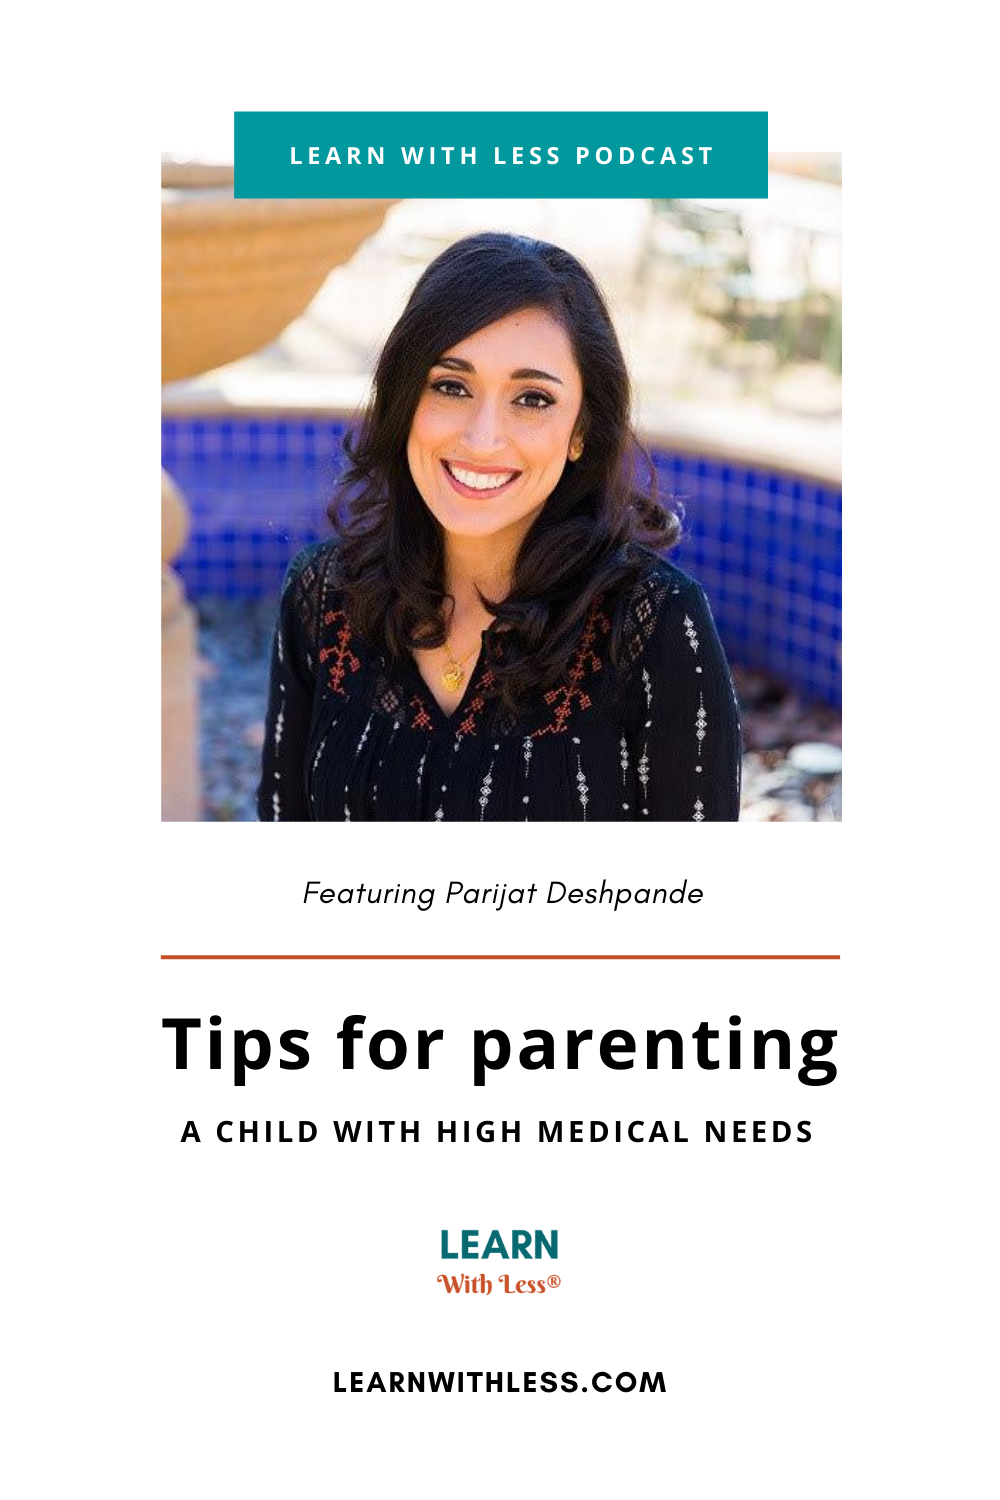 Tips for parenting a child with medical needs, with Parijat Deshpande